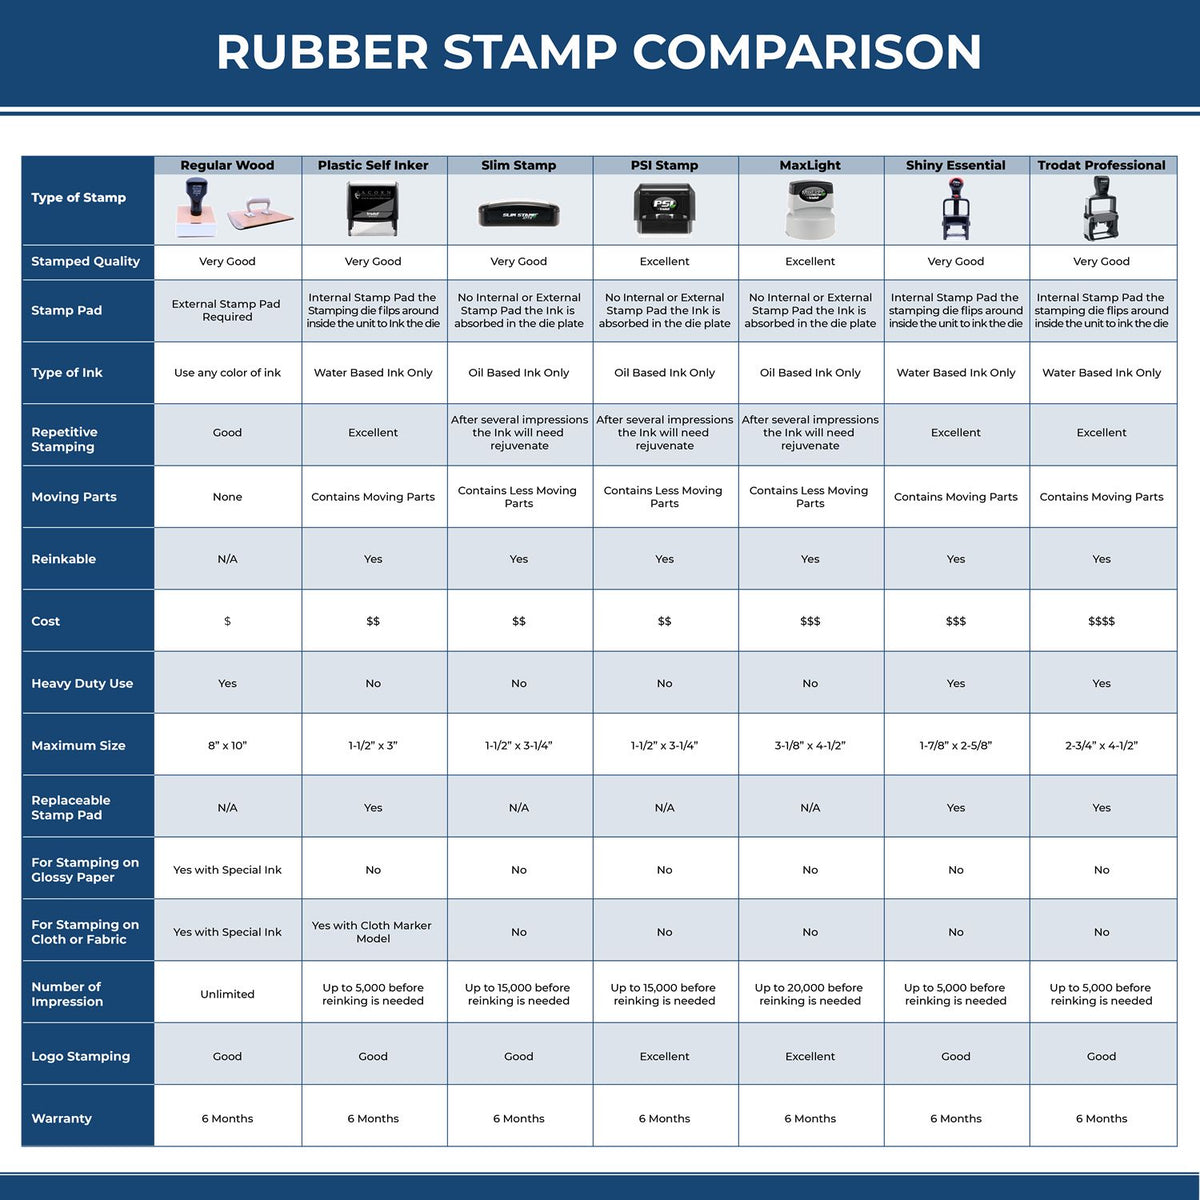 Paid with Box Rubber Stamp 4178R Rubber Stamp Comparison